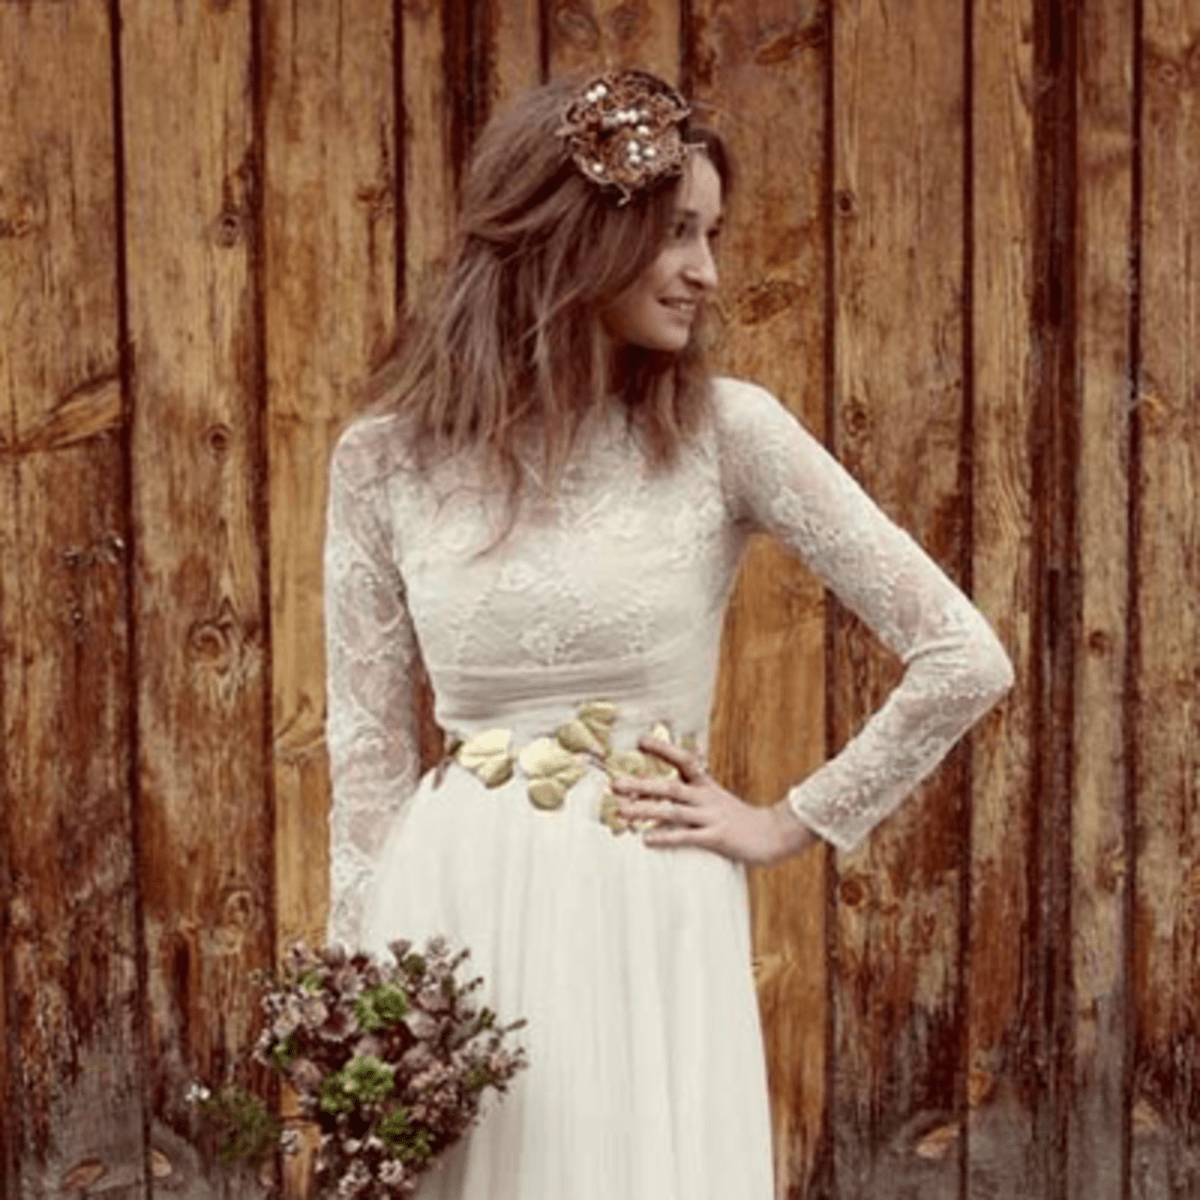 24 Autumn Wedding Dresses – Style Ideas To Swoon Over